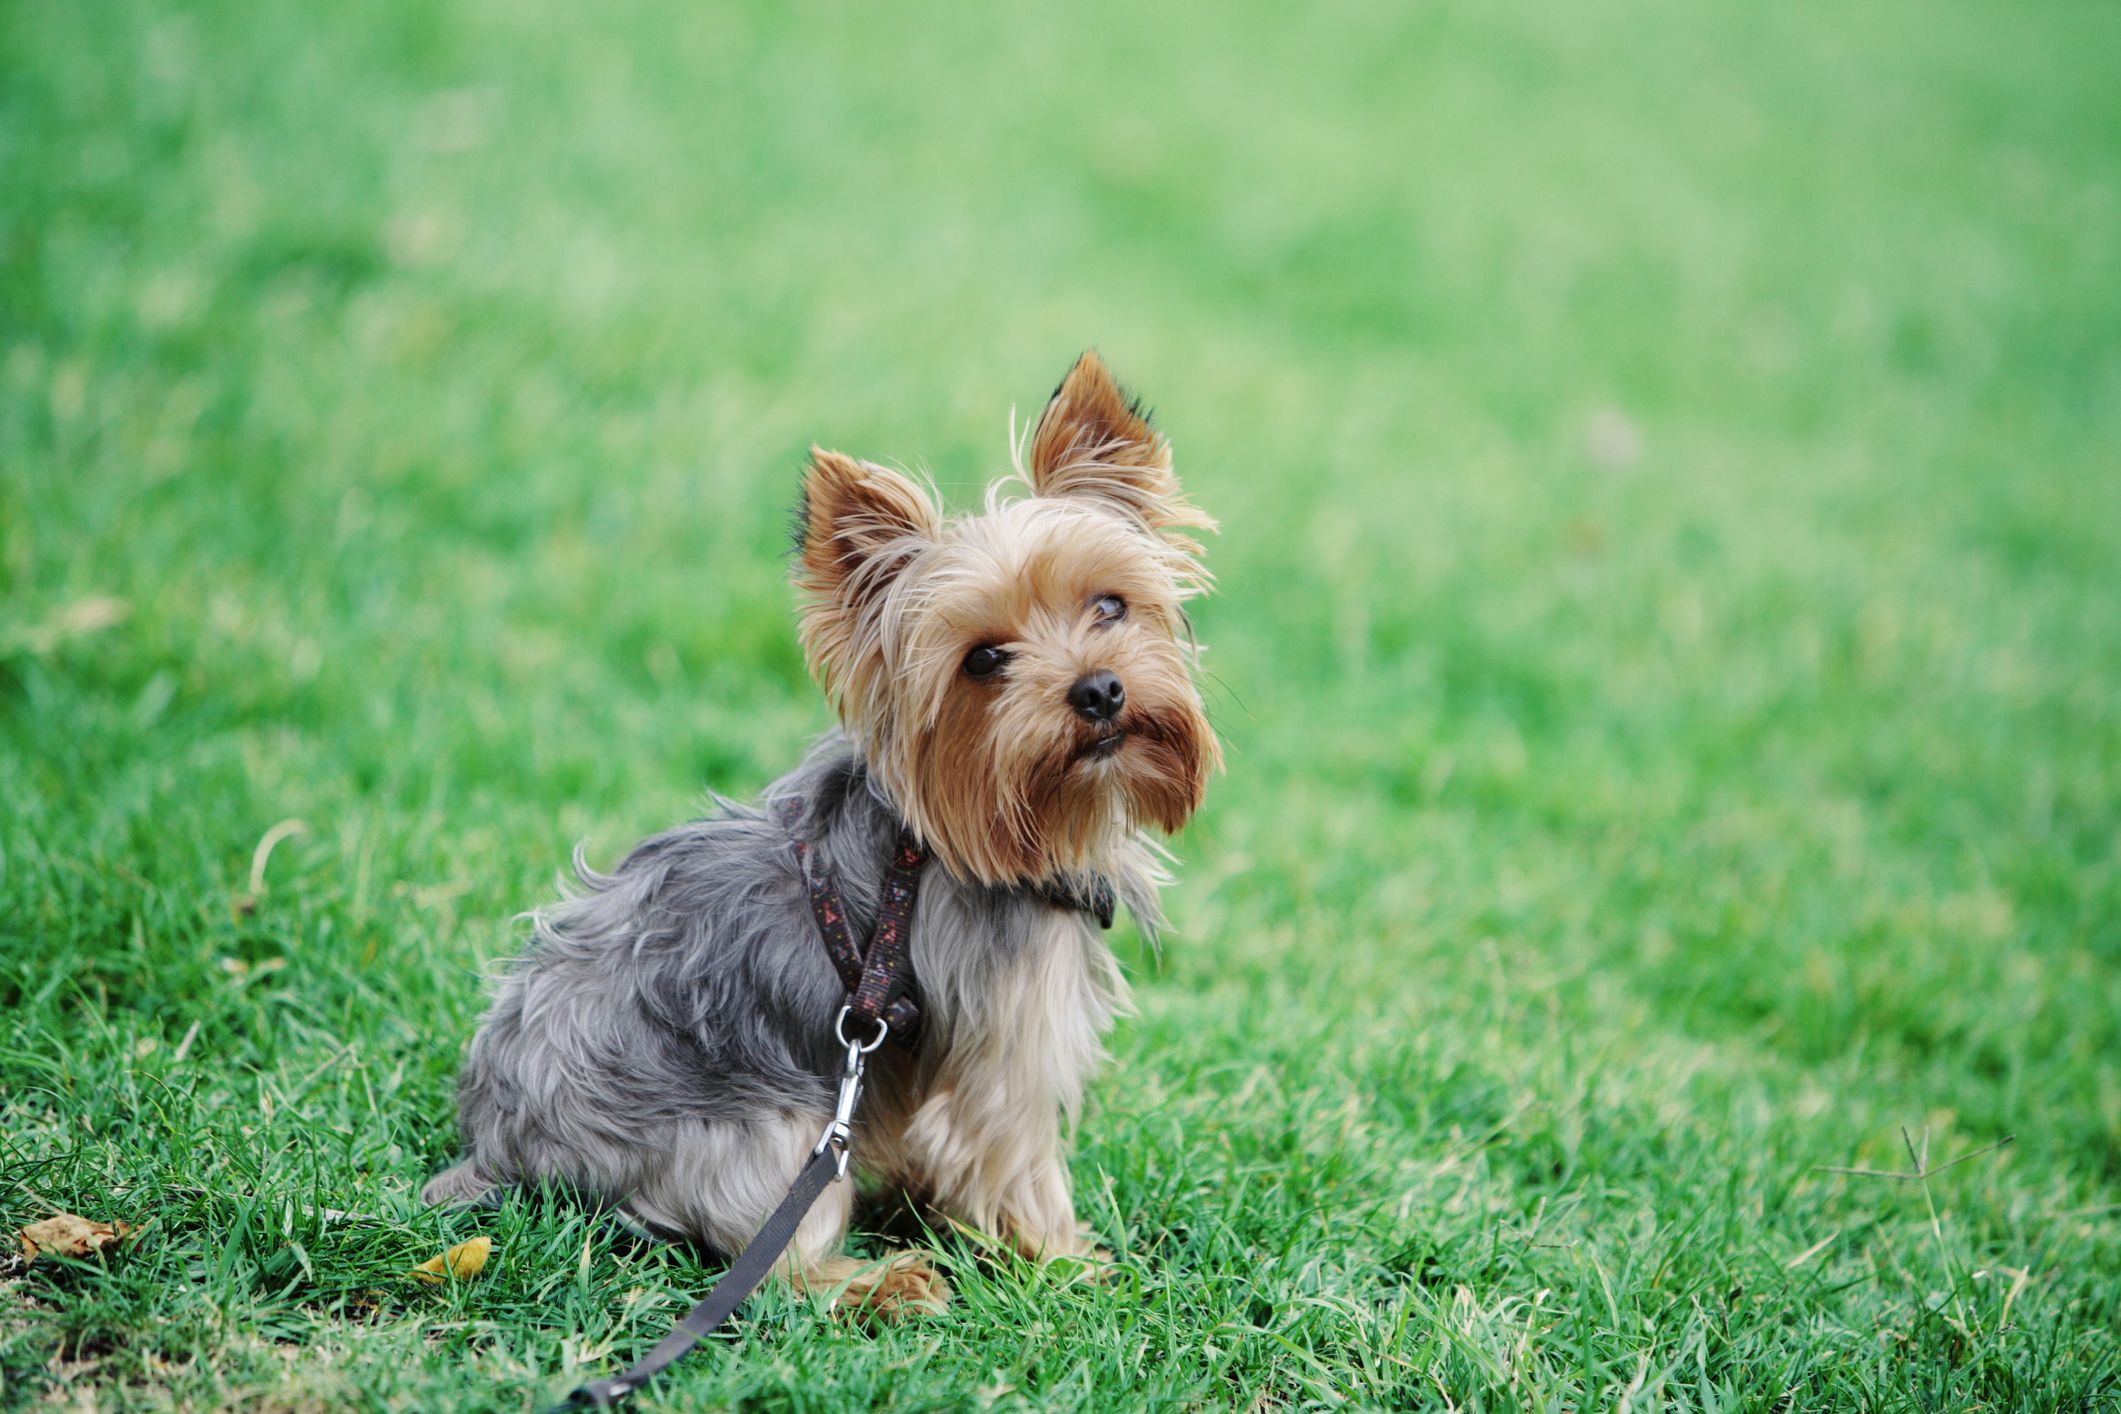 Dogs That Stay Small: Yorkie, Chihuahua 